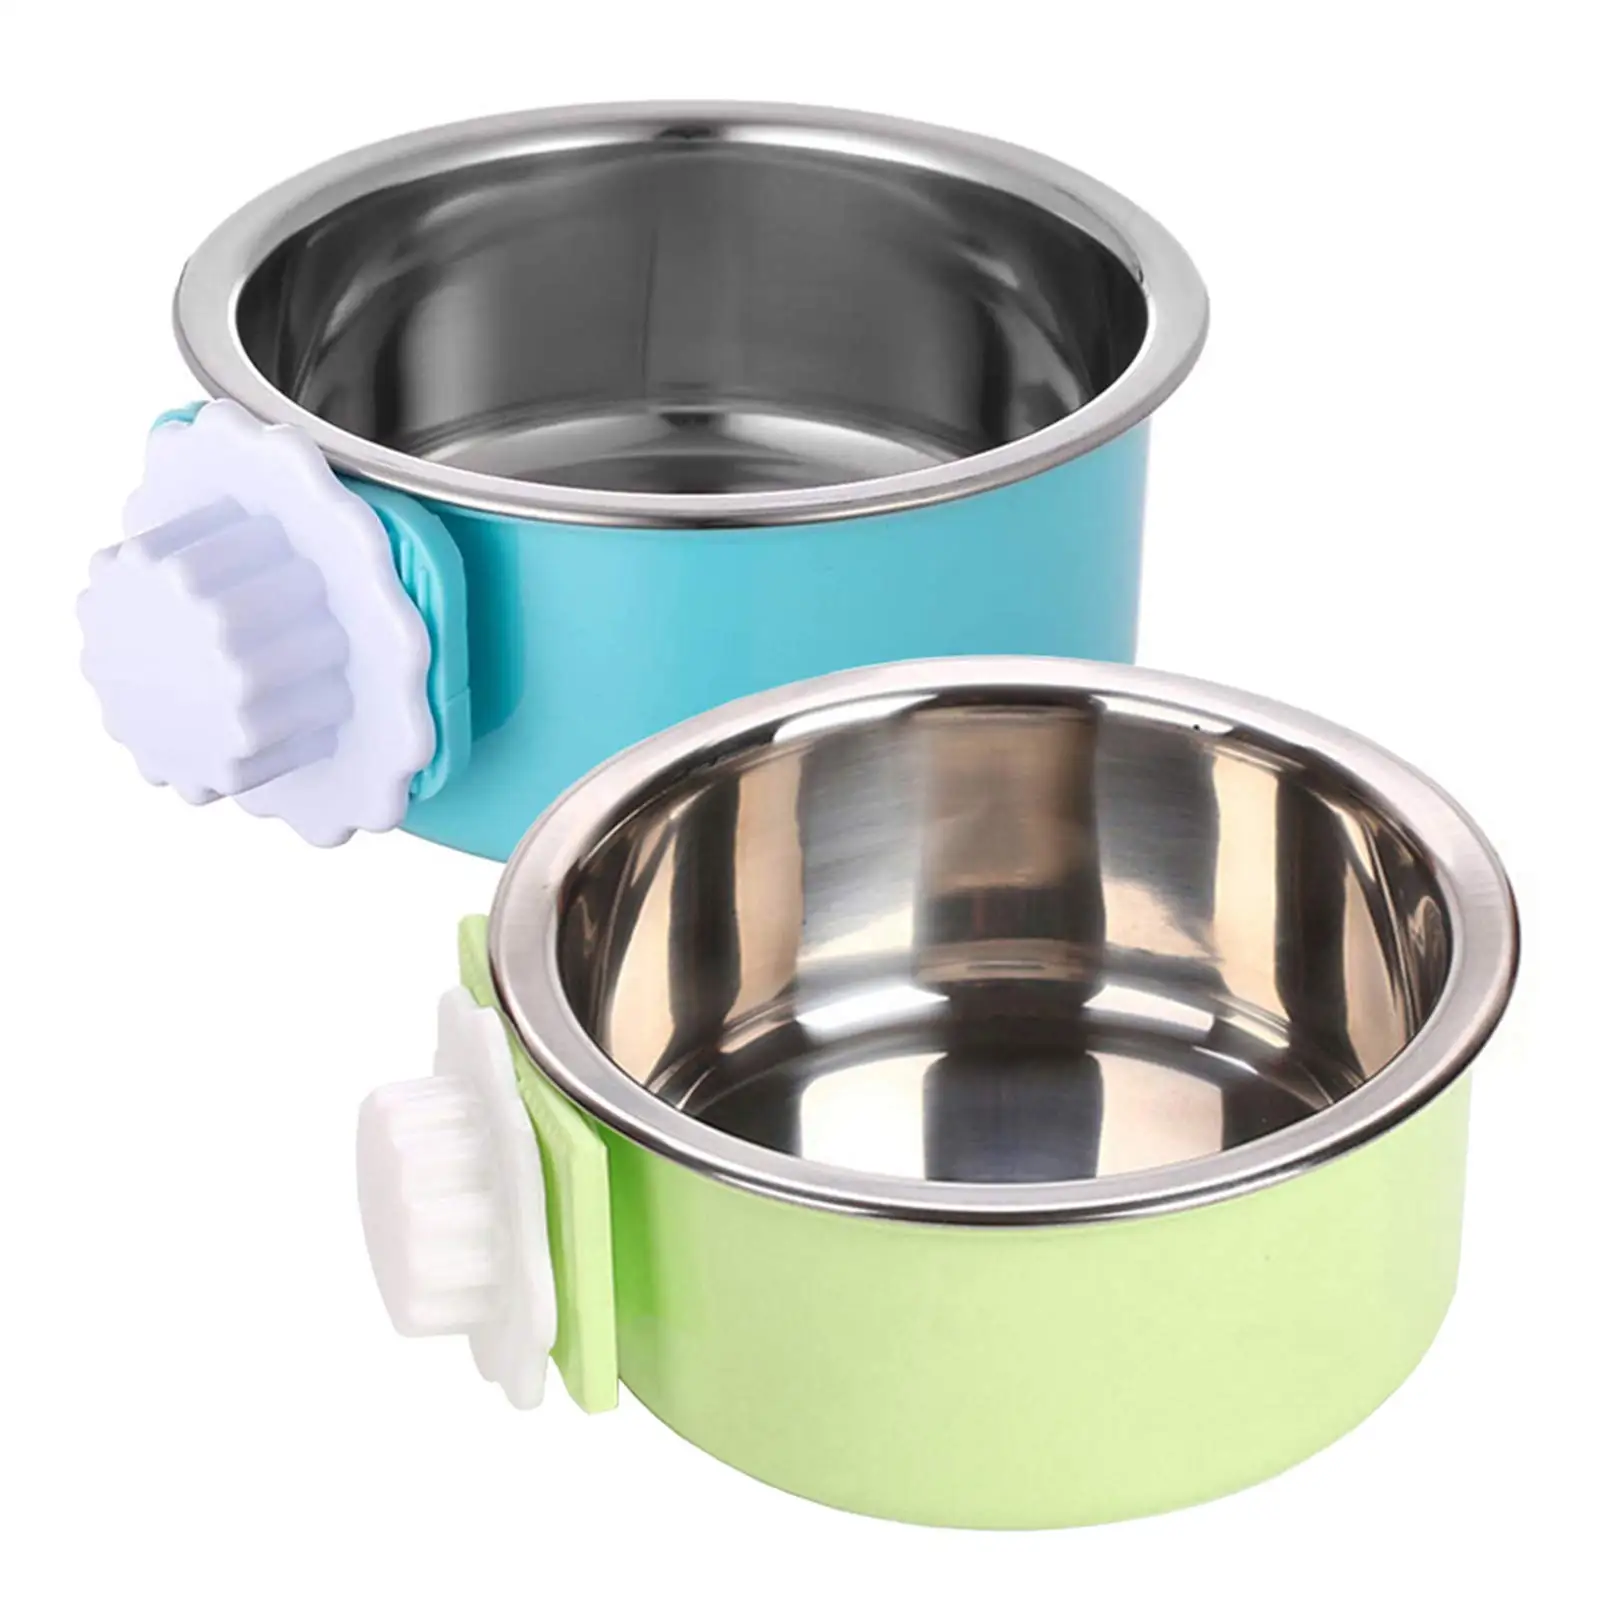 

Removable Stainless Steel Hanging Pet Cage Bowl Food & Water Feeder Coop Cup Stainless Steel Luxurious Pet Bowls & Feeders, Blue,red,yellow blue,pink blue,red green